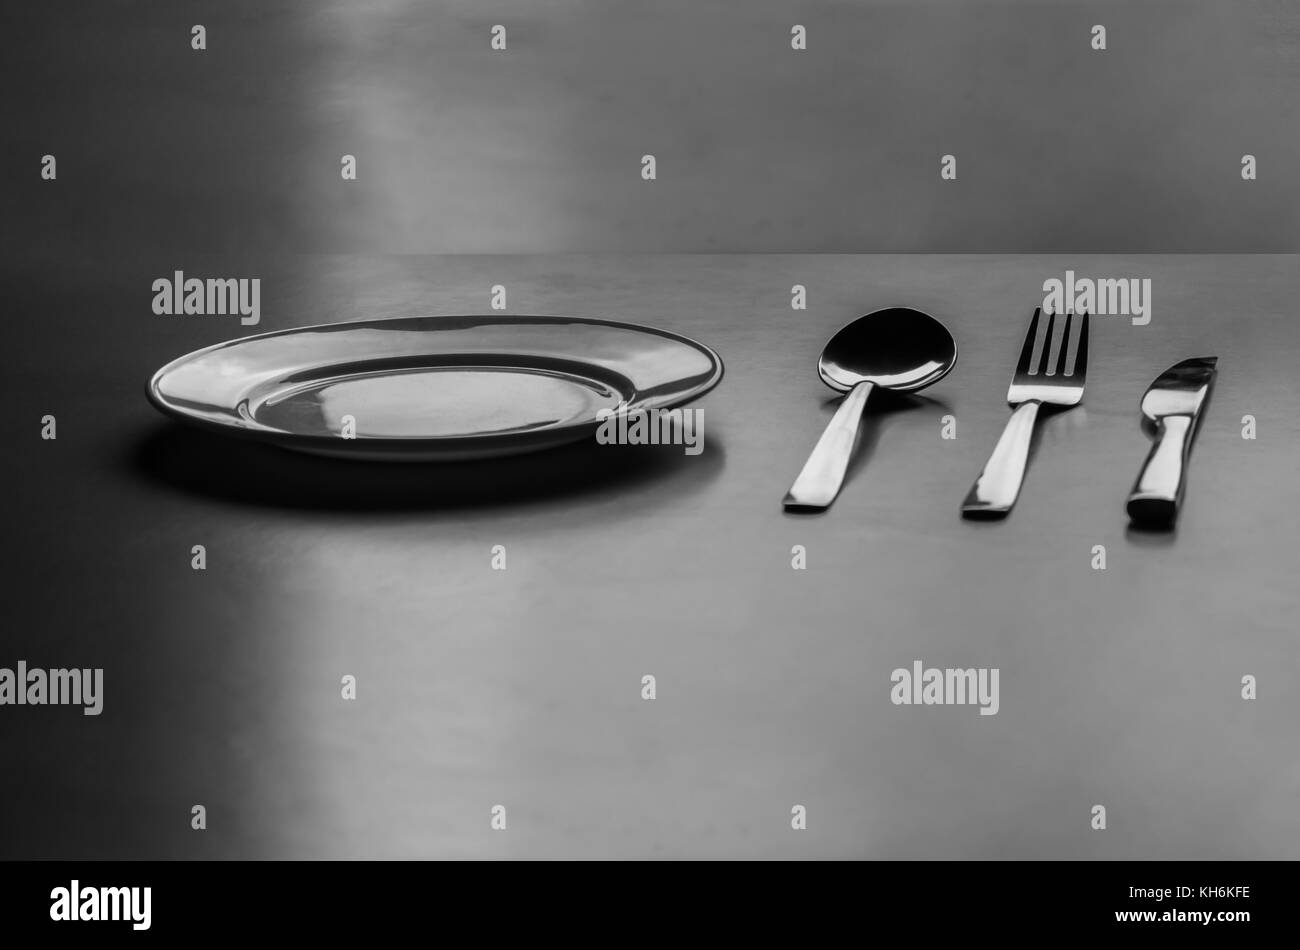 Empty plate with spoon, knife and fork  Stock Photo